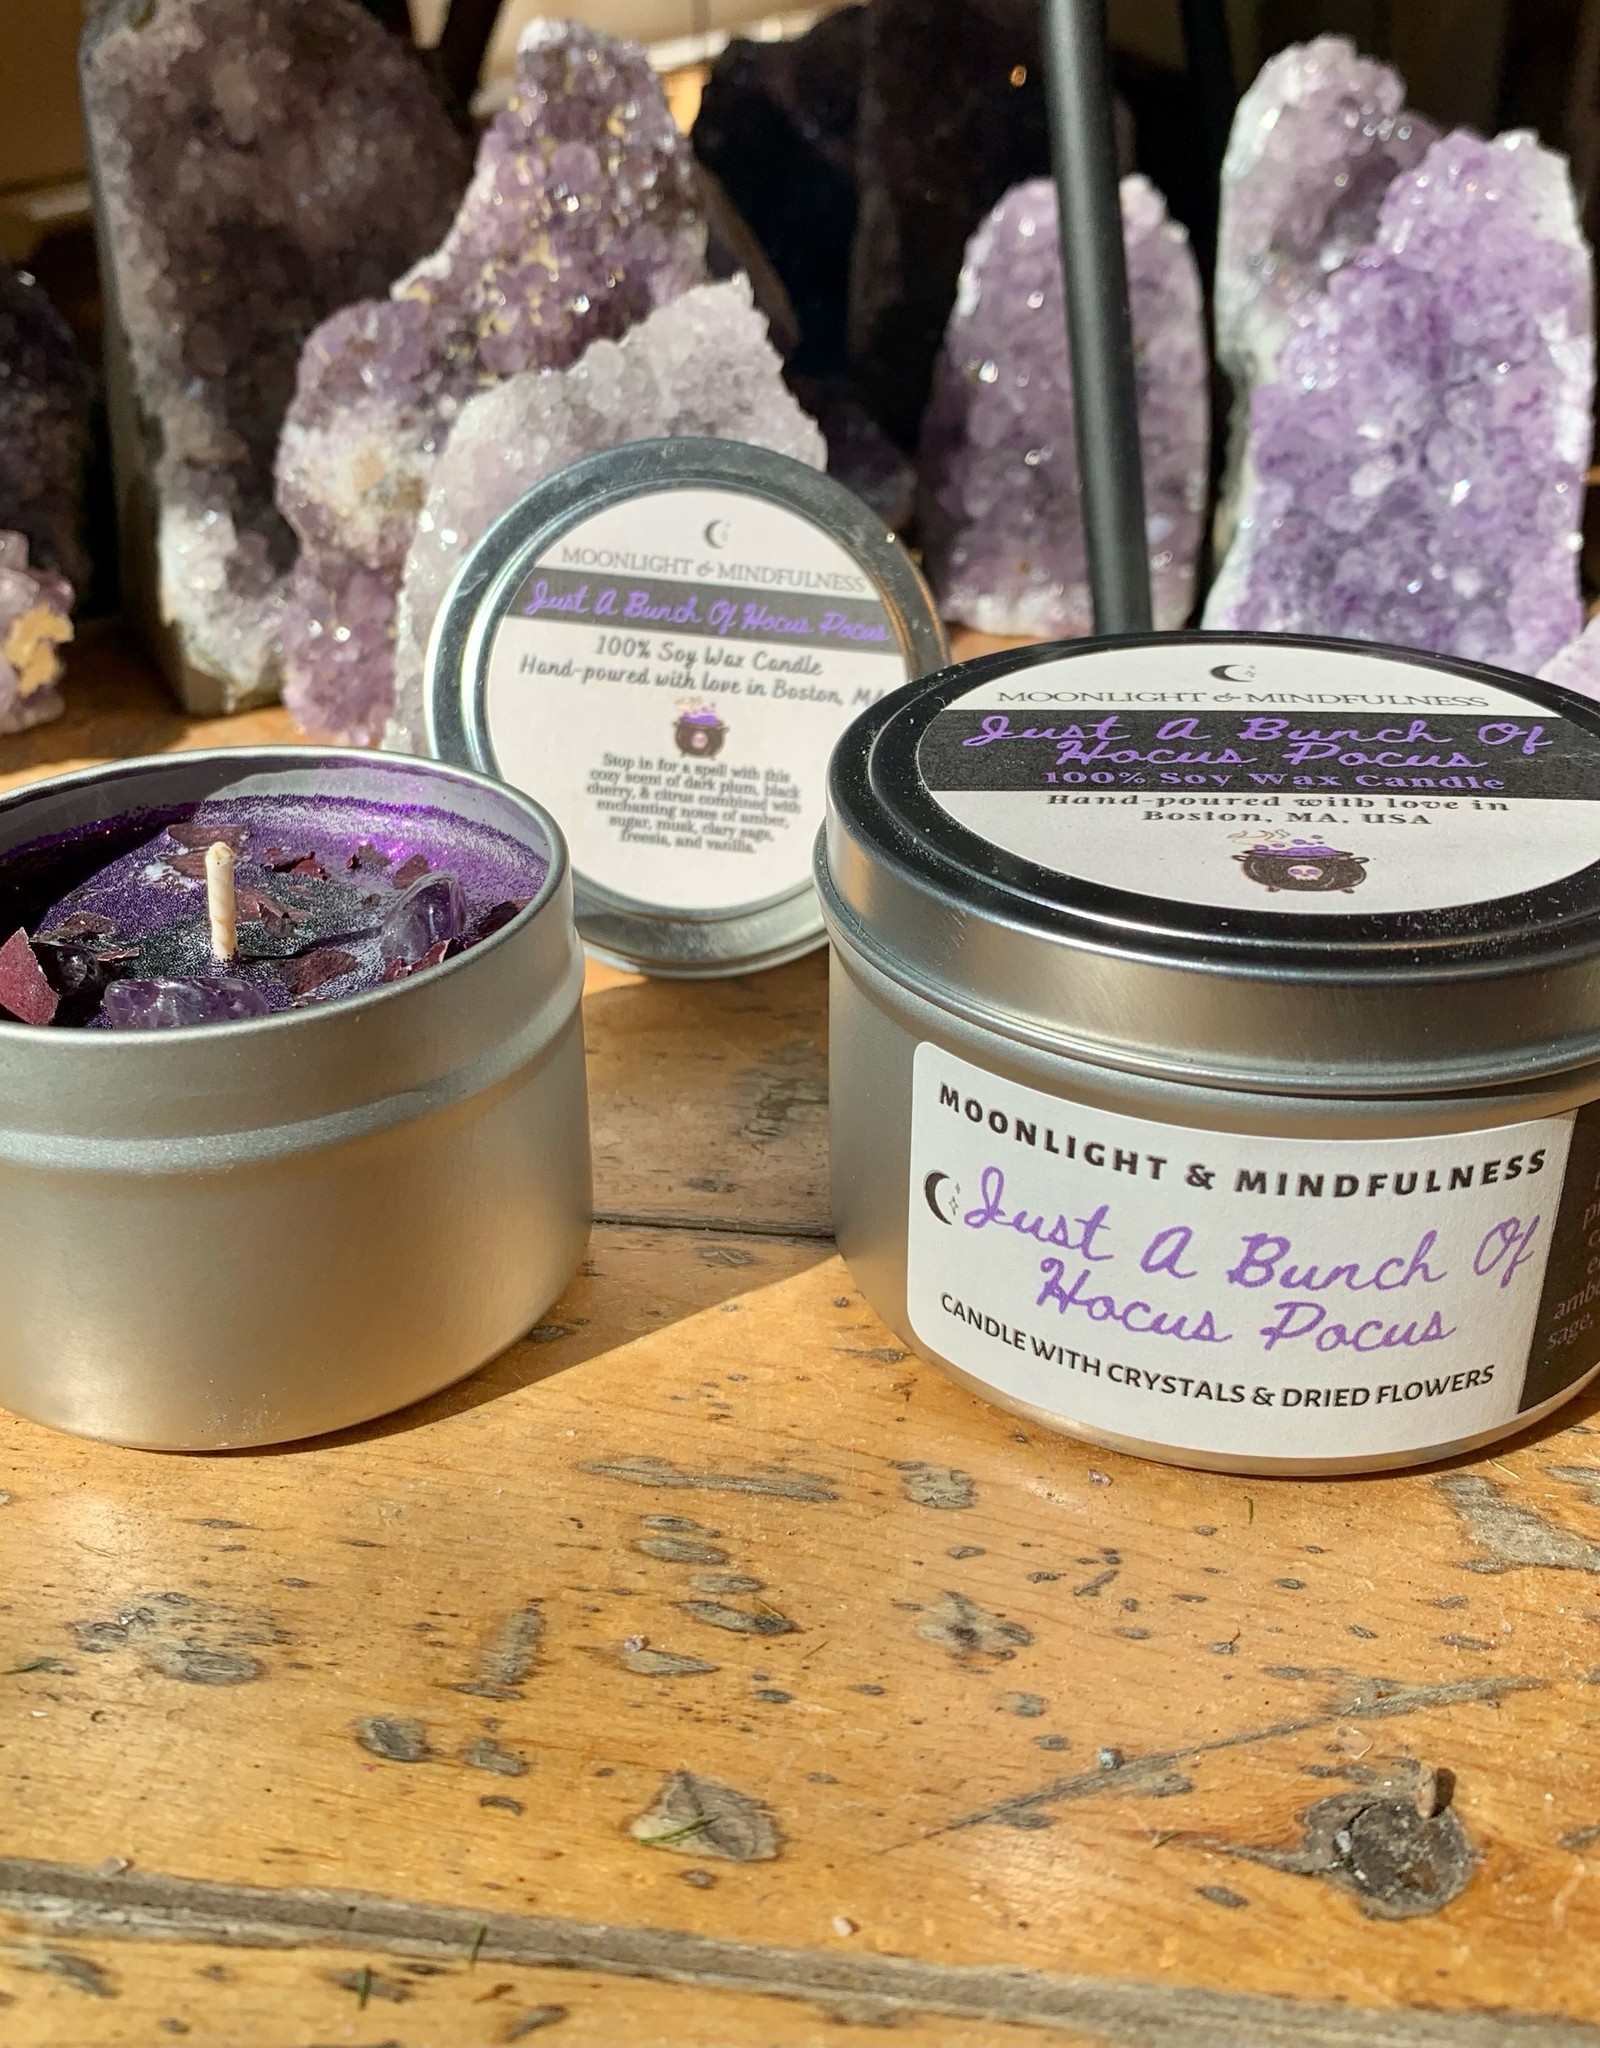 Moonlight and Mindfulness Just a Bunch of Hocus Pocus 8oz Candle (Fall)